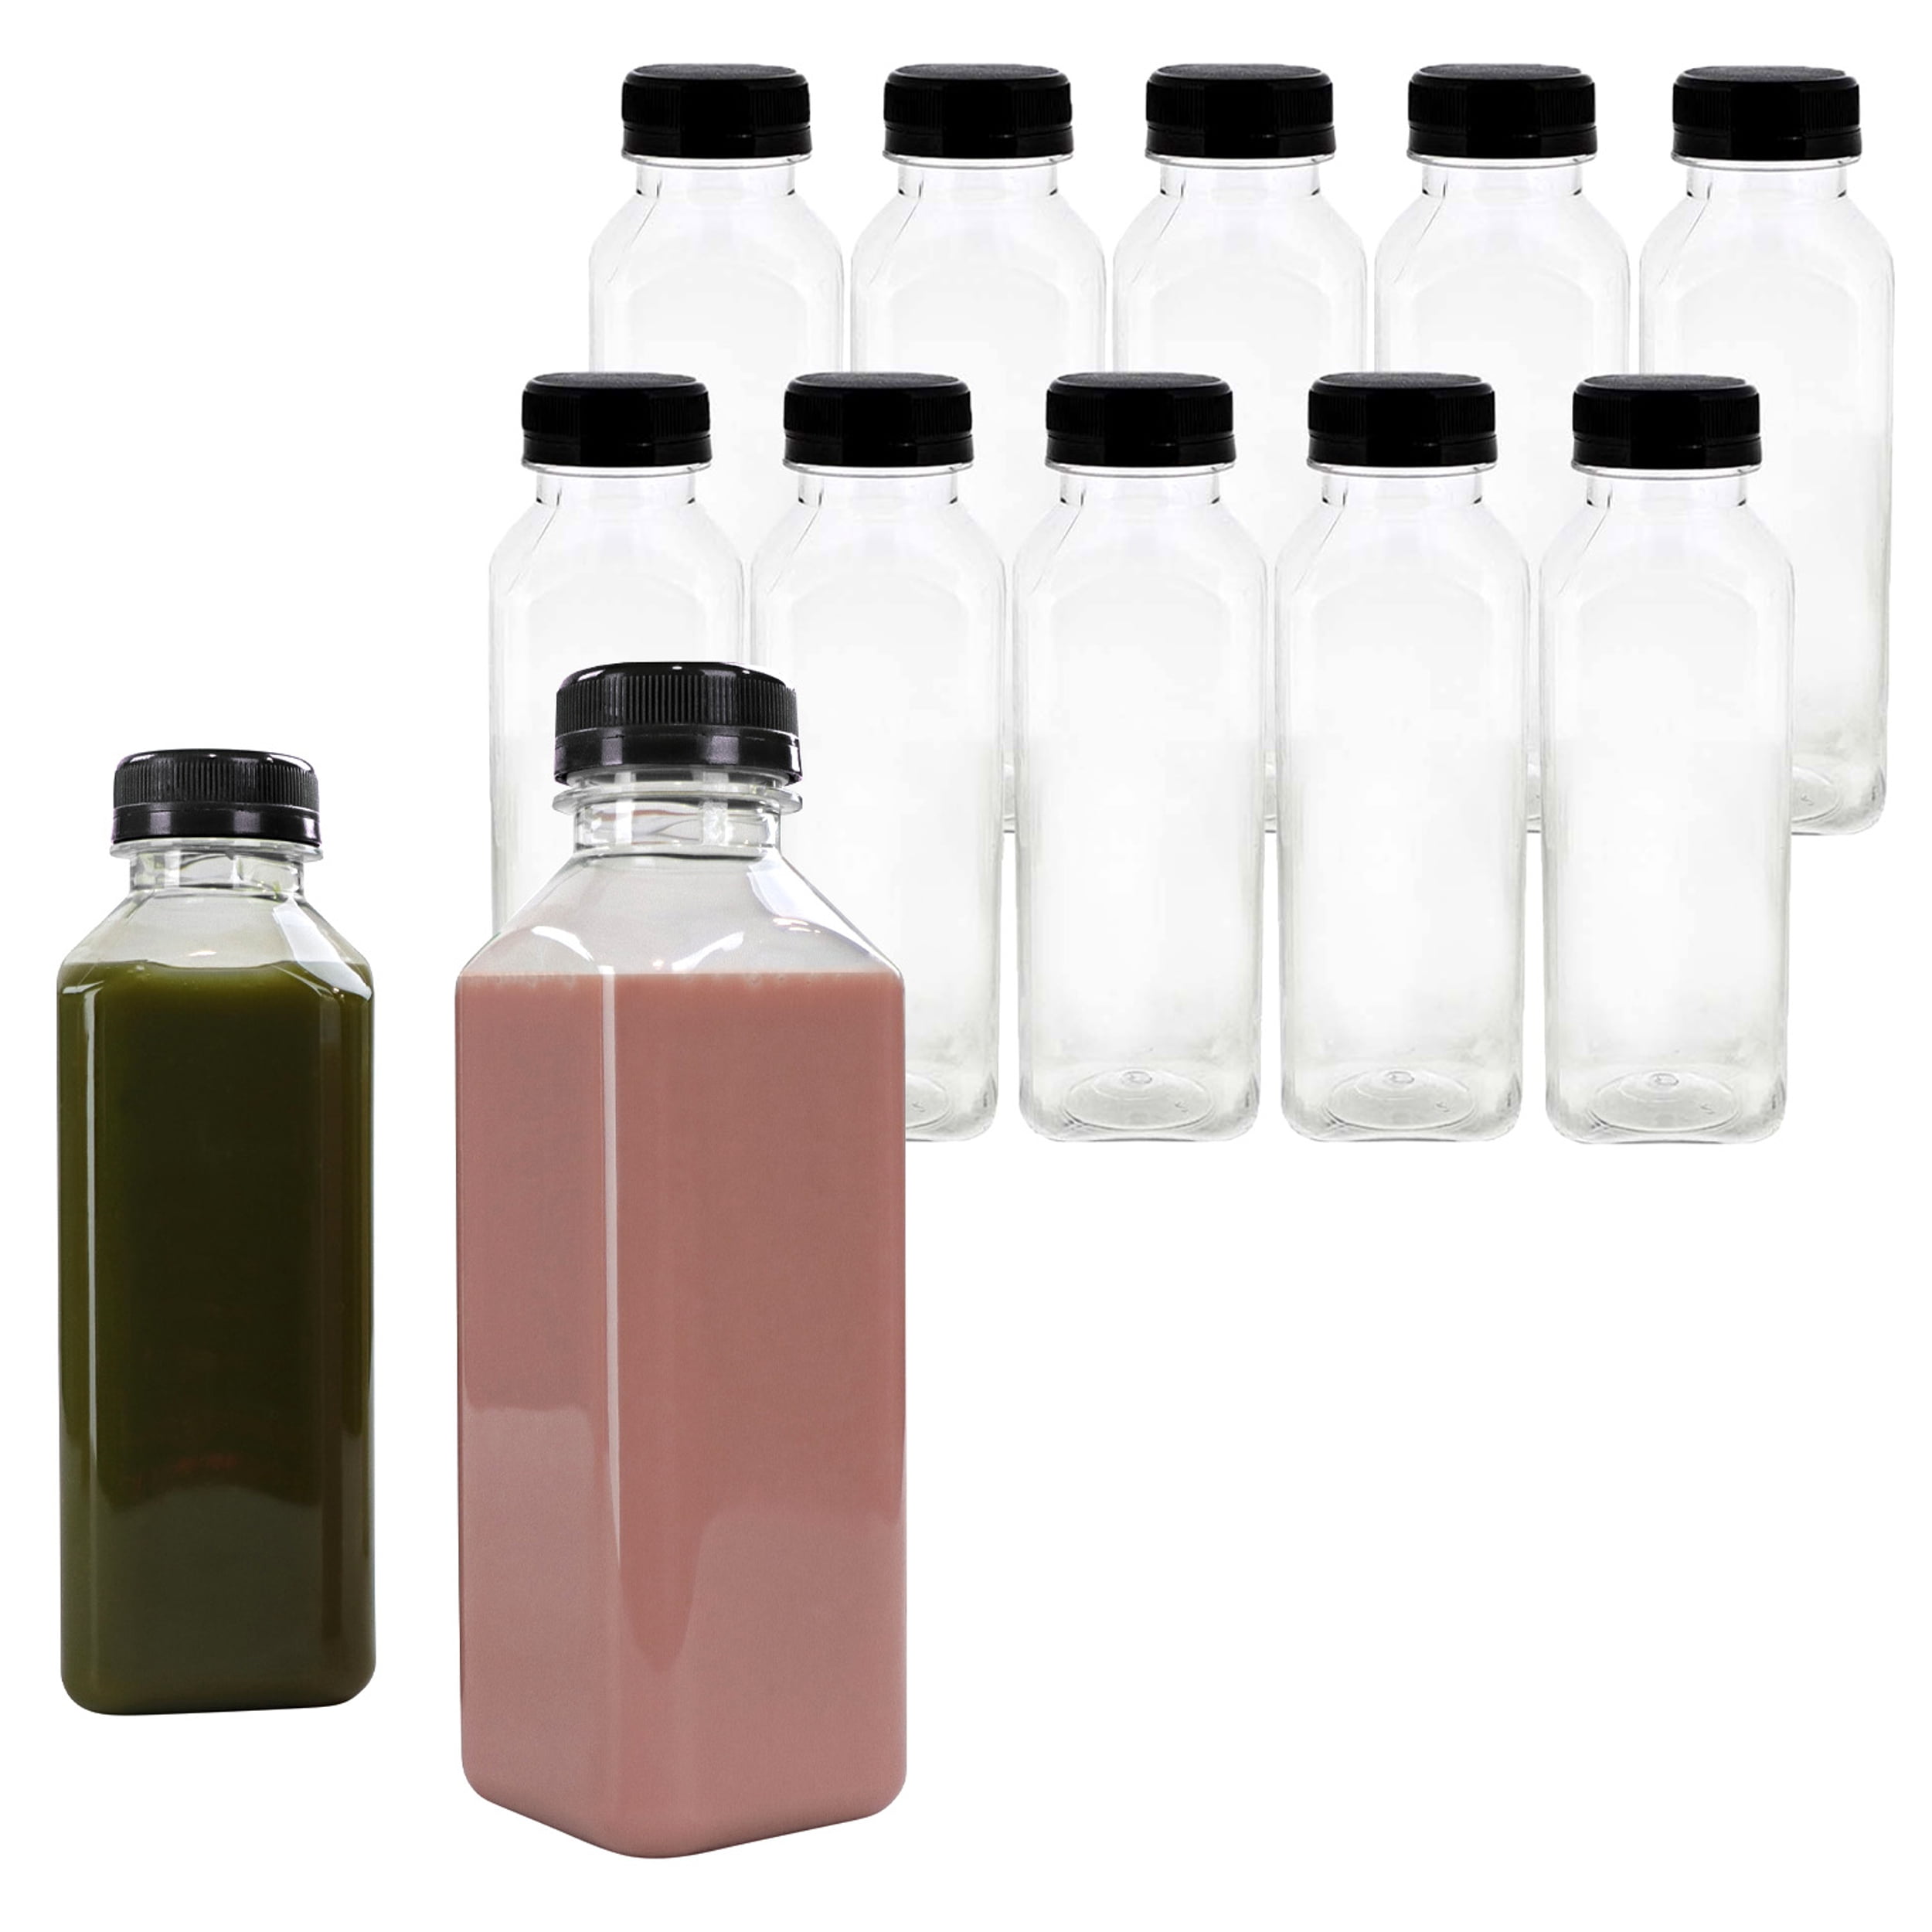 Just Jars - 250ml bottle (with lid)